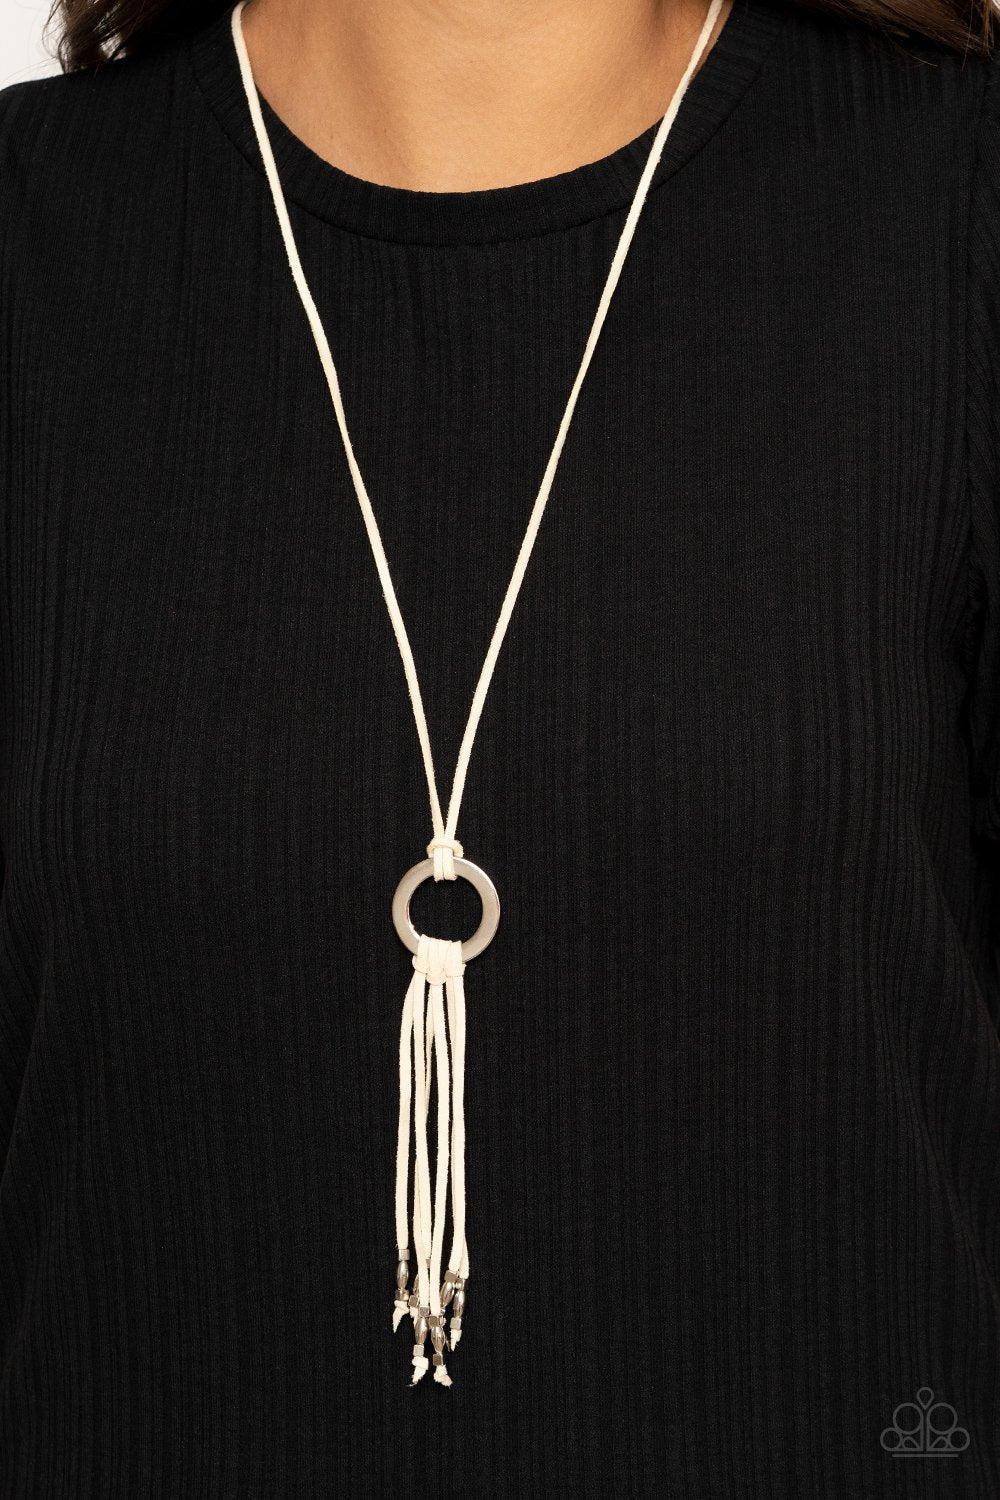 Feel at HOMESPUN White Suede and Silver Tassel Necklace - Paparazzi Accessories - model -CarasShop.com - $5 Jewelry by Cara Jewels